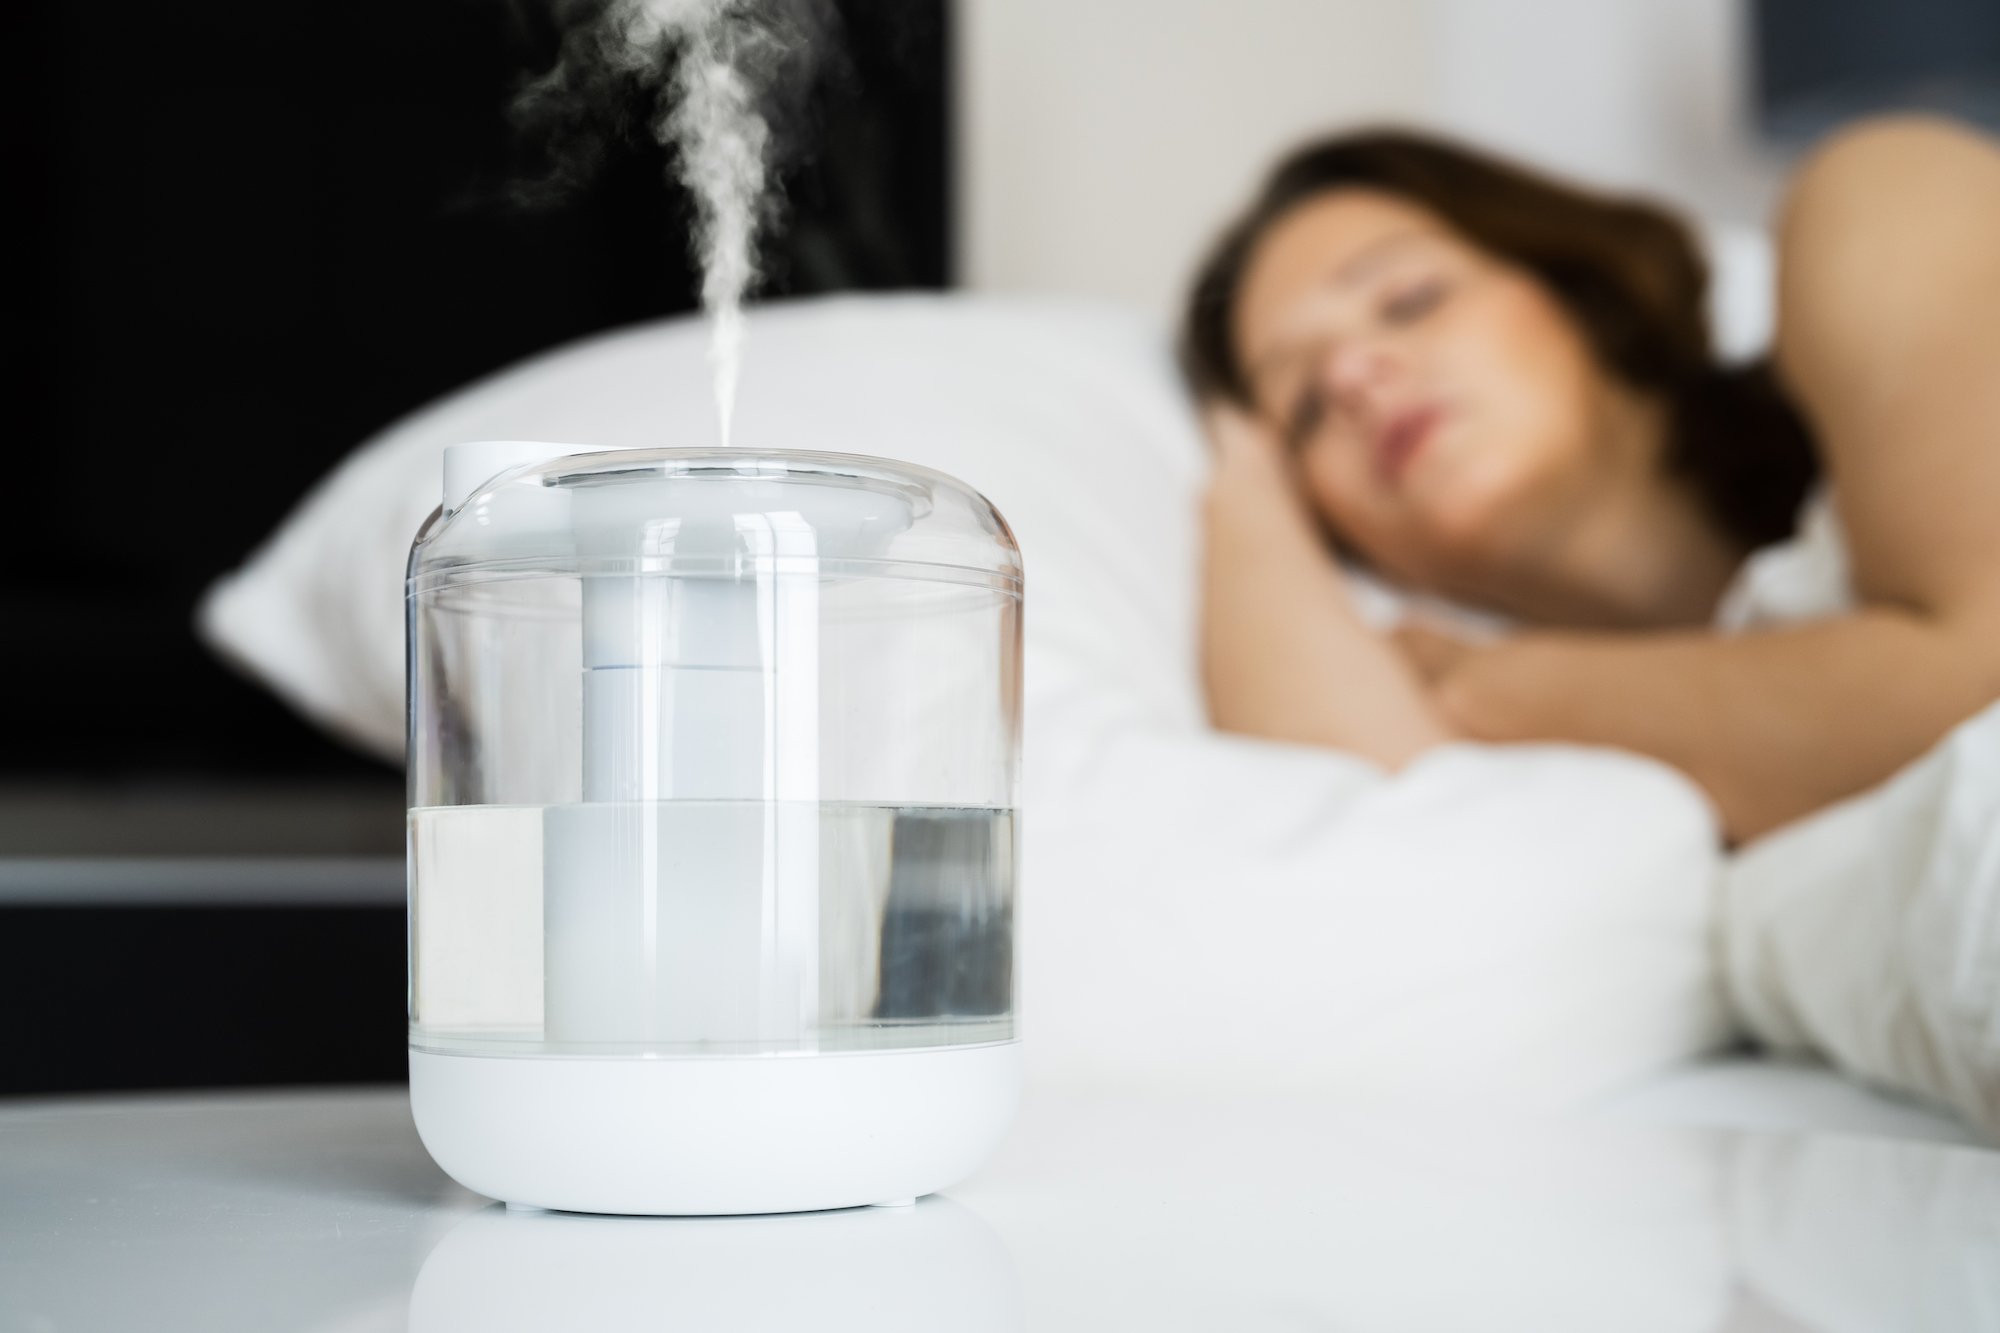 How to Clean a Humidifier the Right Way, According to Experts